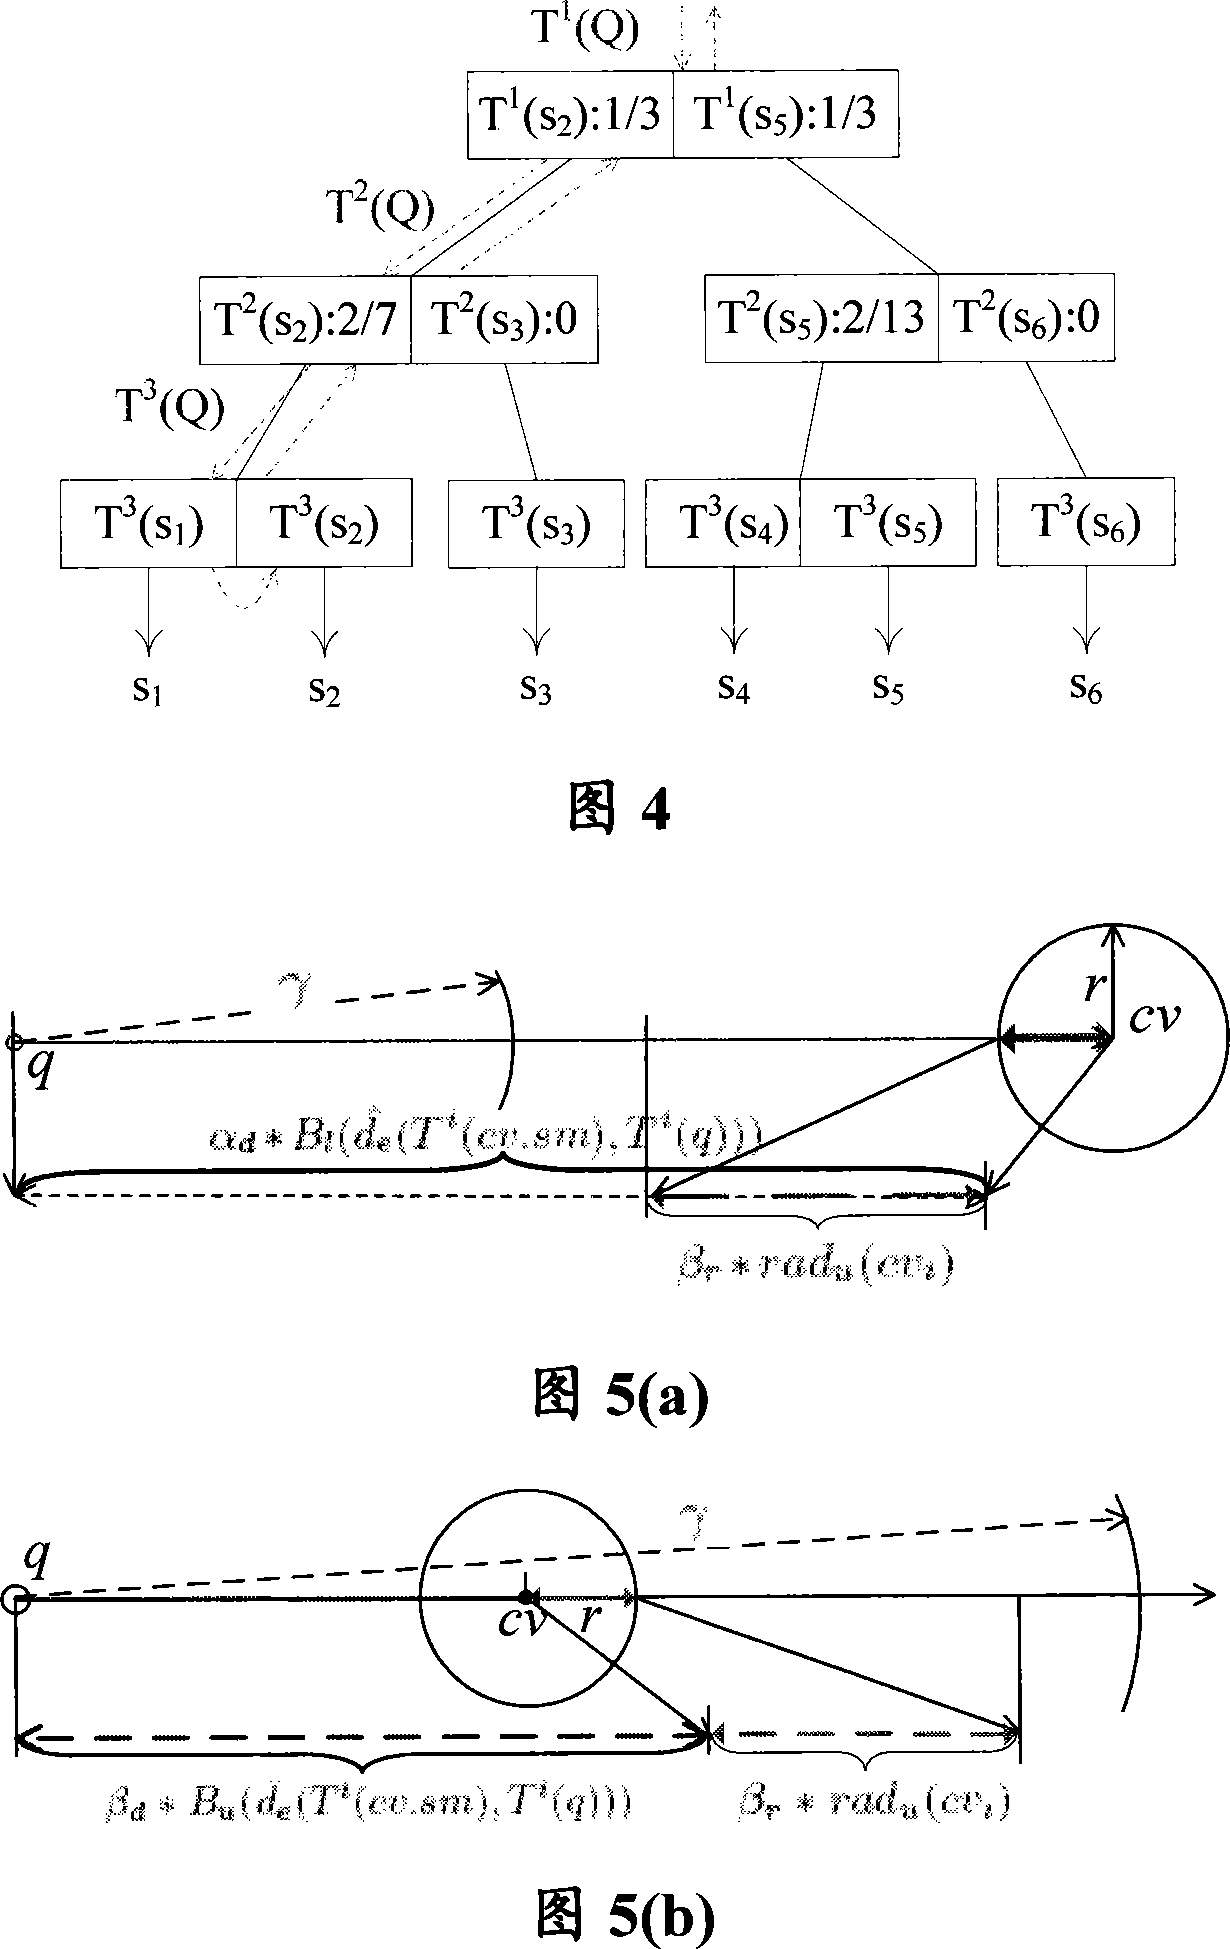 Long sequence data dimensionality reduction method used for approximate query